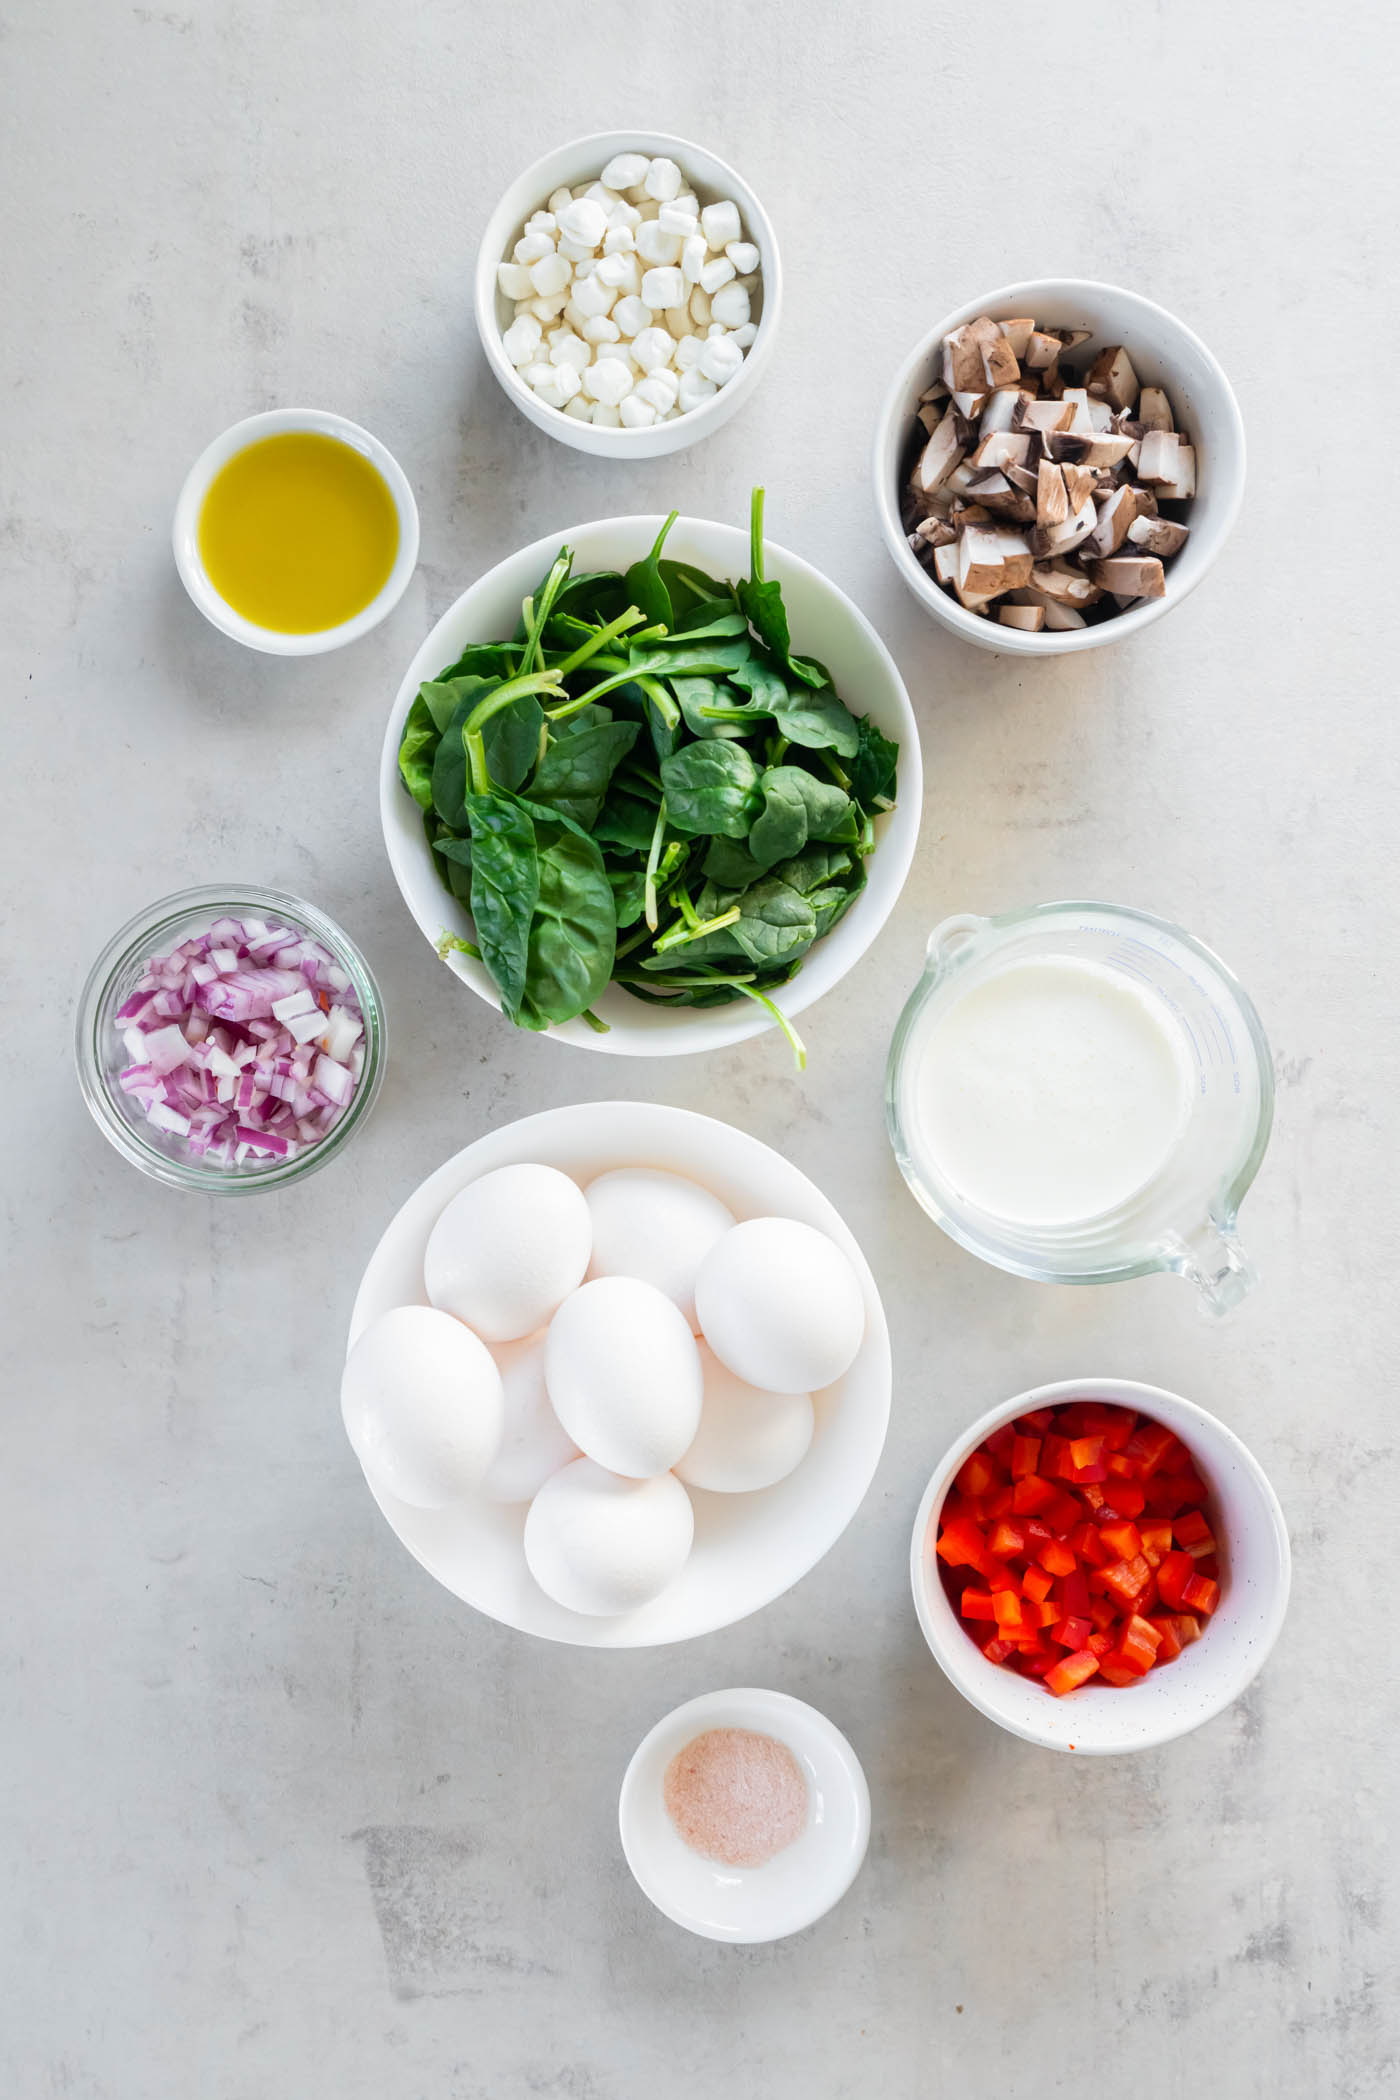 Ingredients for frittata recipe.